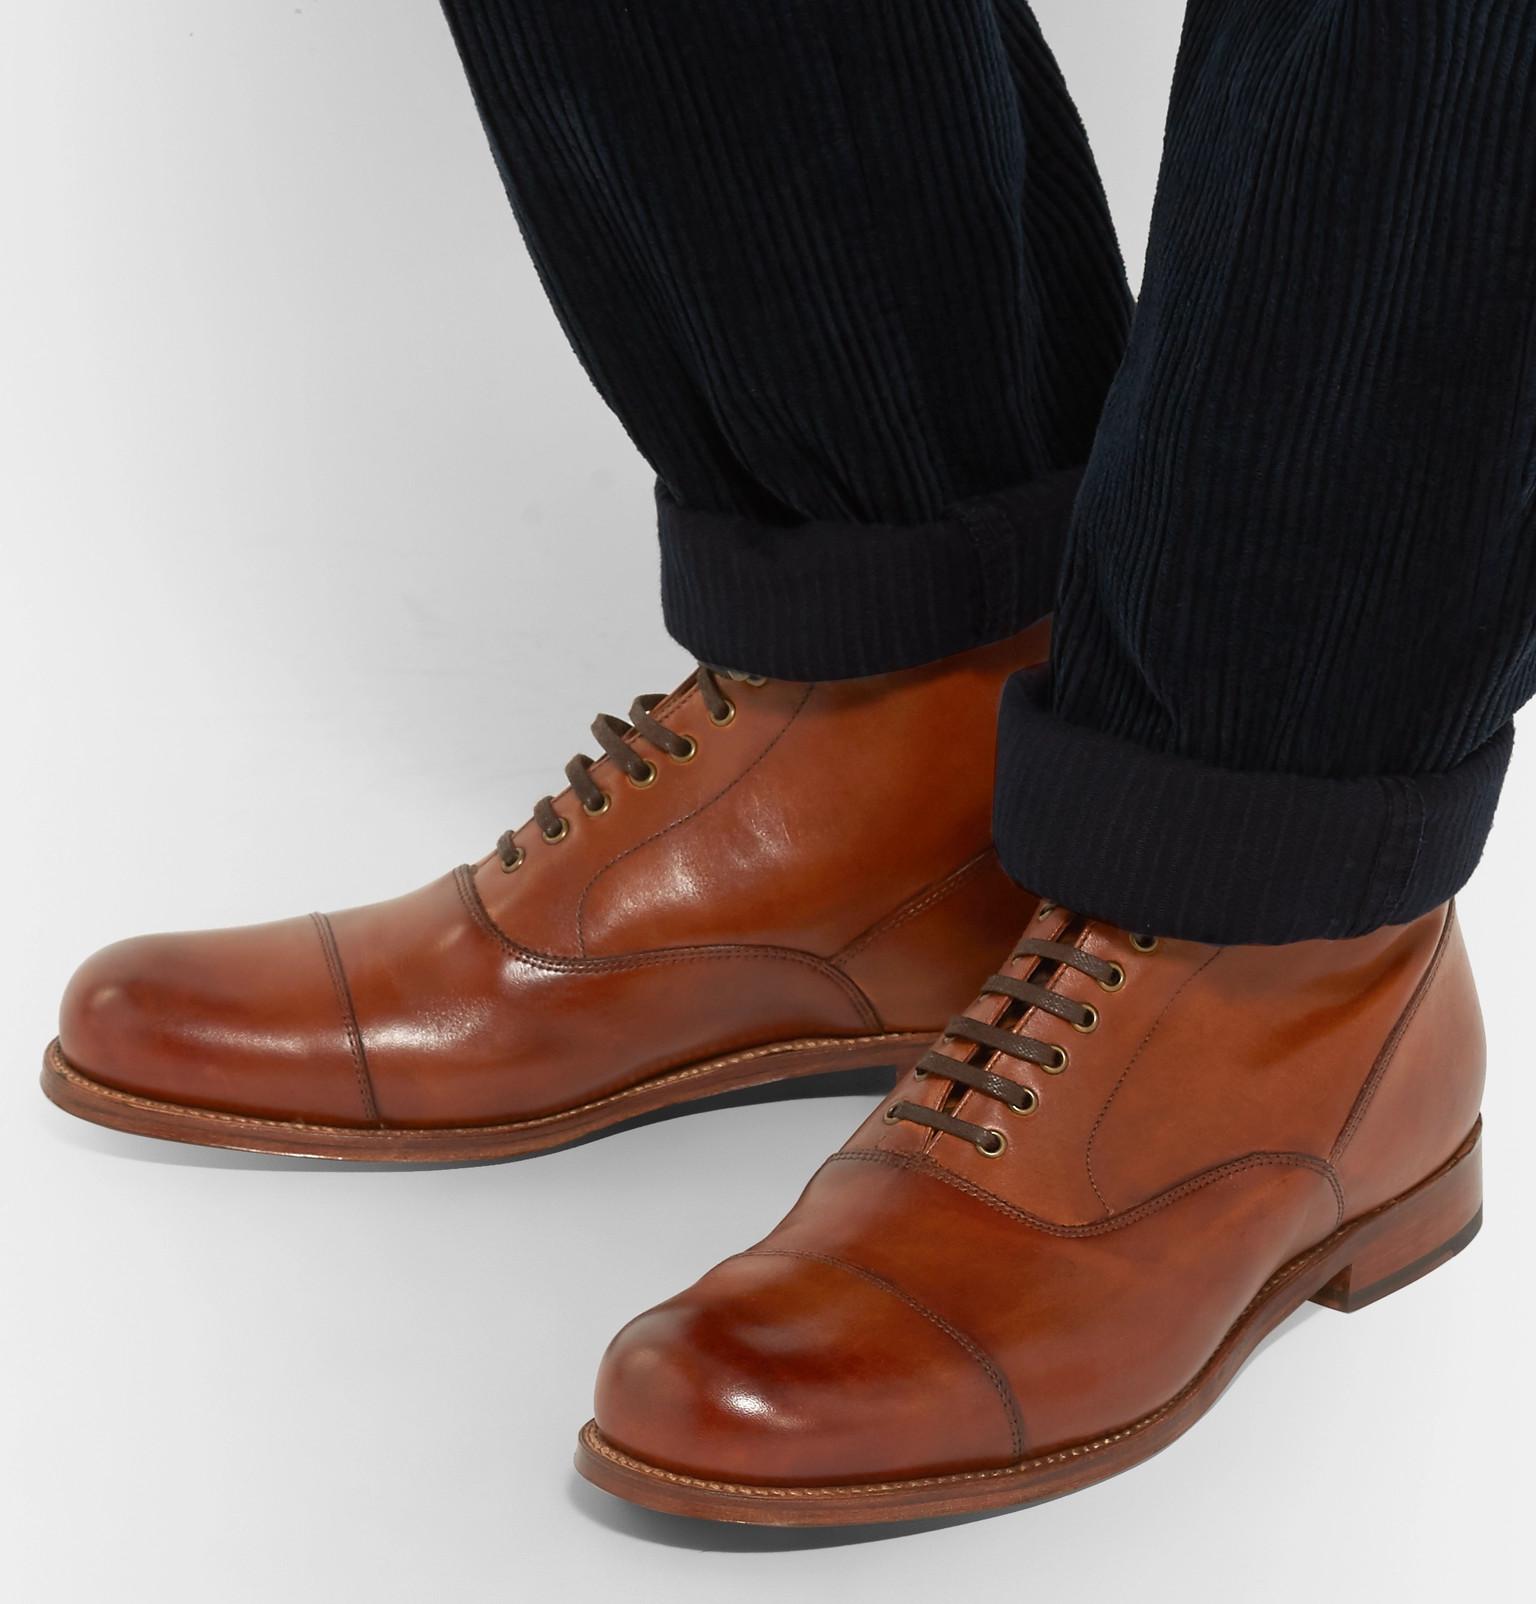 Grenson Leander Cap-toe Burnished-leather Boots in Brown for Men - Lyst